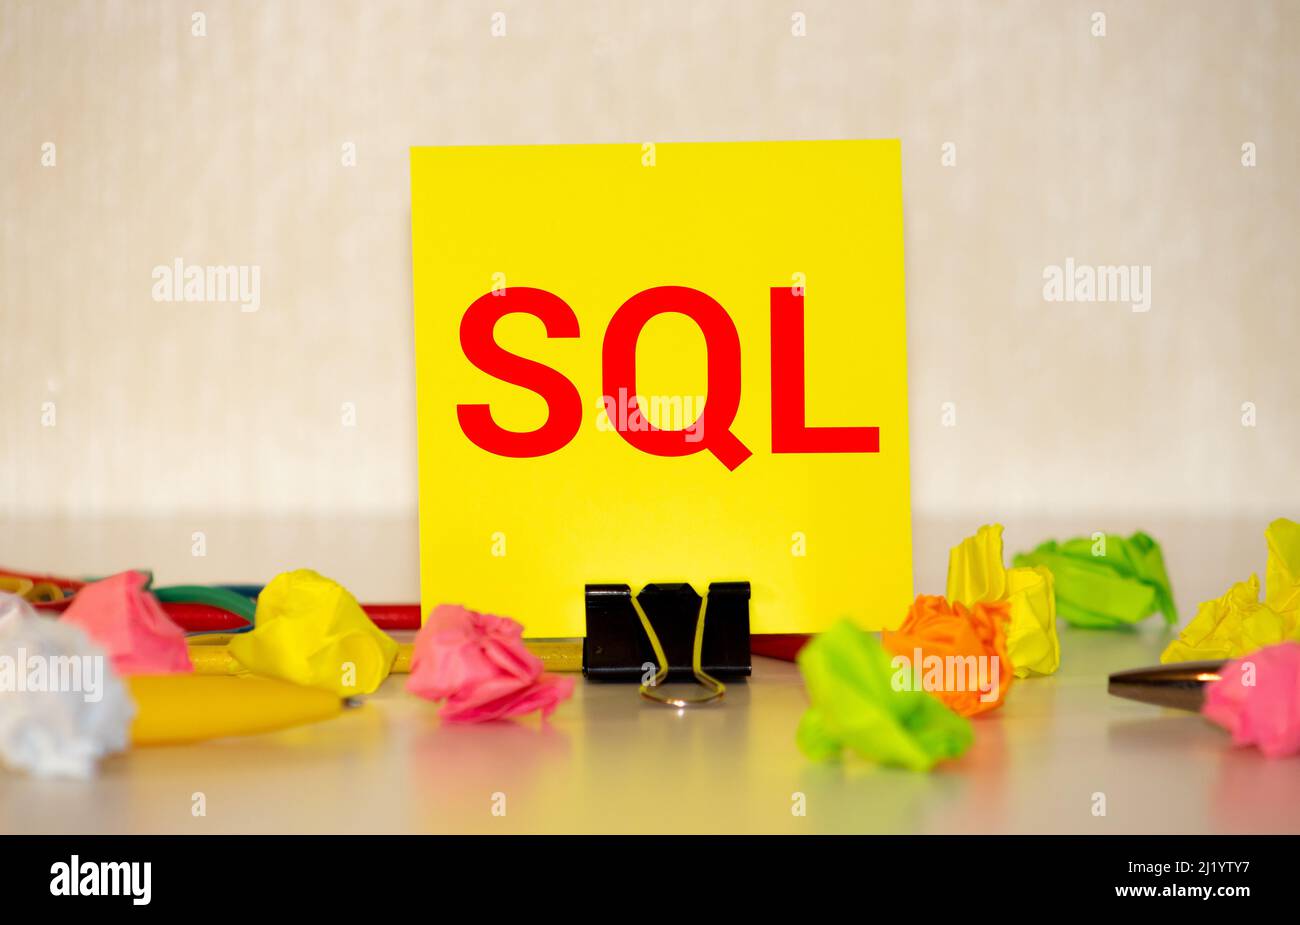 The SQL label on the yellow business card from the daily planner. The blue diary and yellow pen are on the orange table. Stock Photo